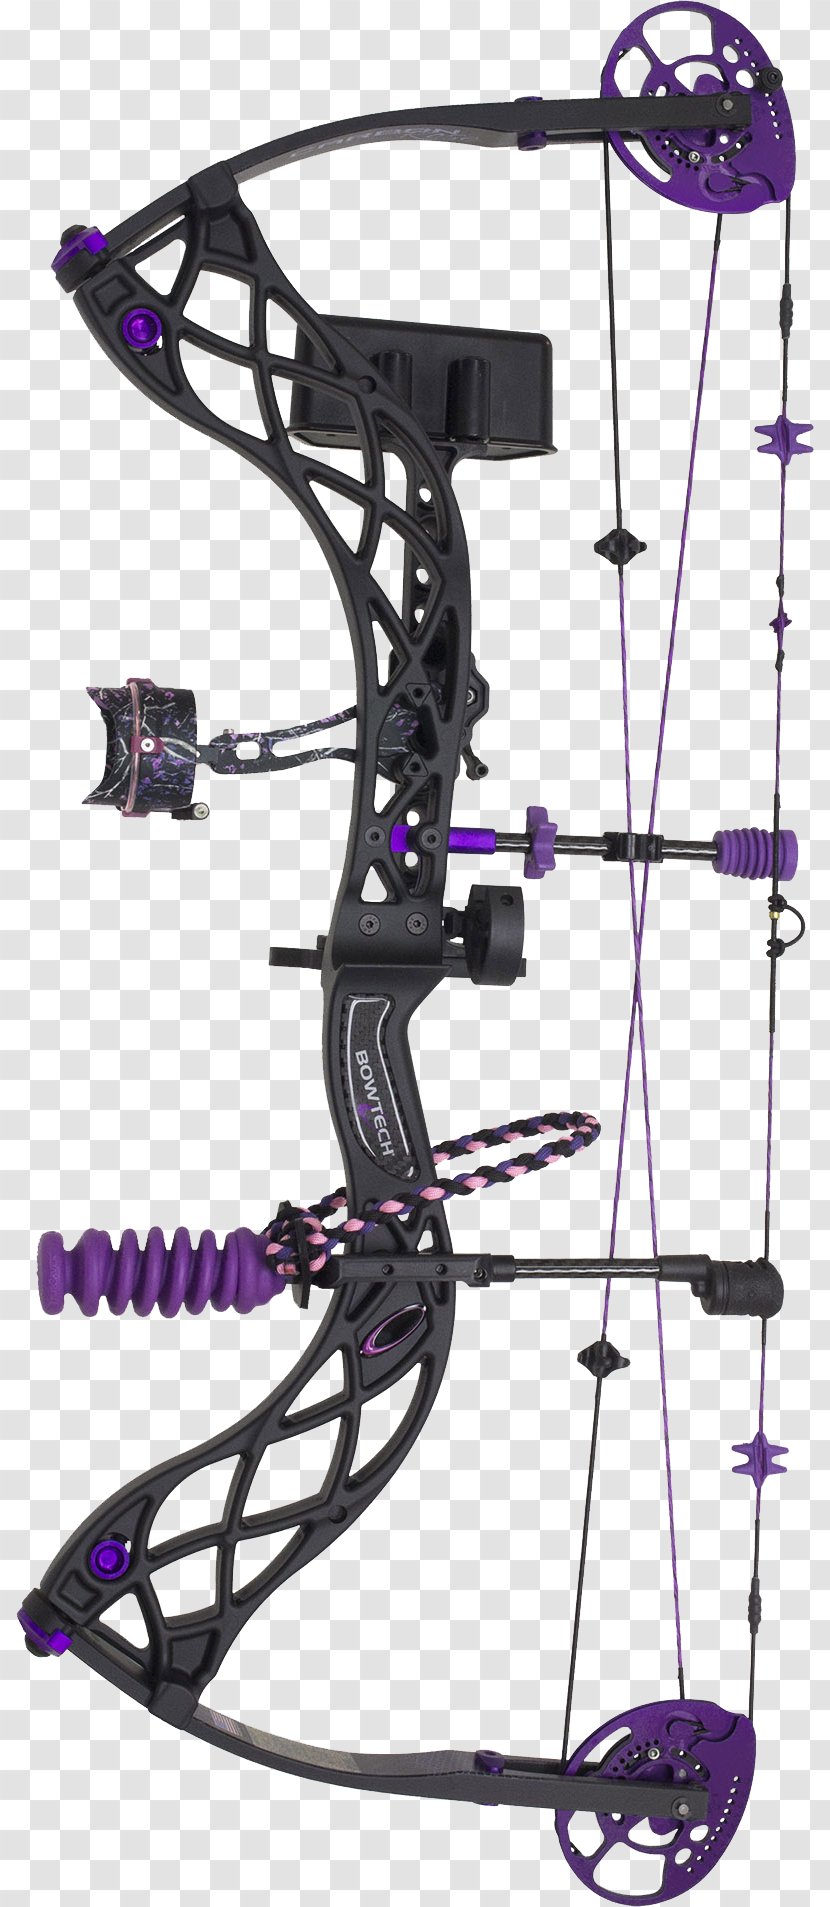 BowTech Archery Bowhunting Compound Bows Bow And Arrow - Bear - Package Transparent PNG